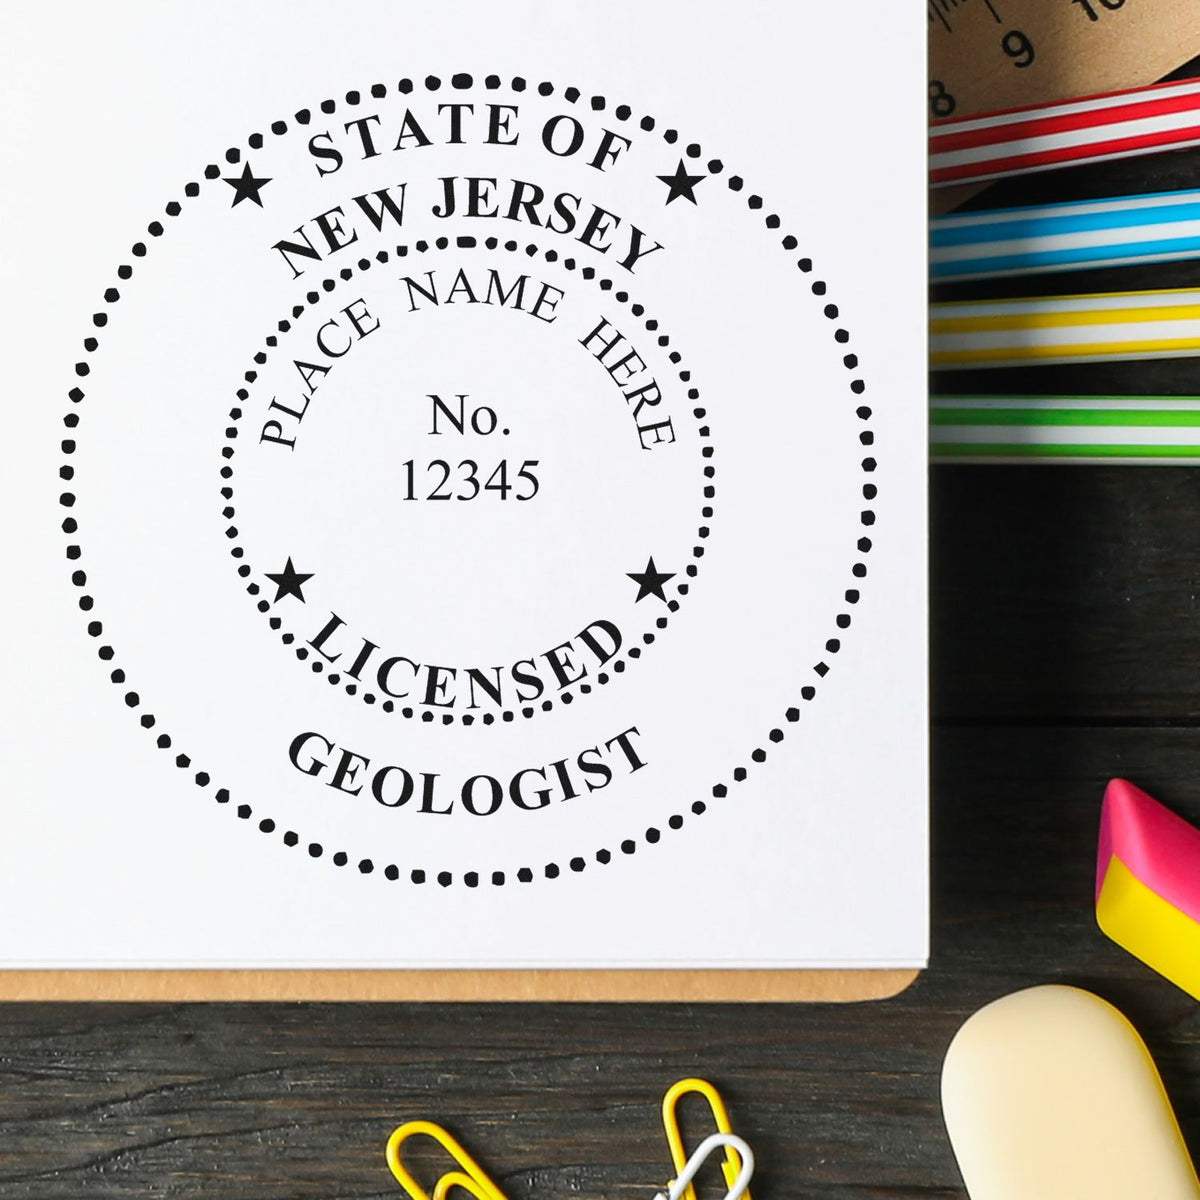 A photograph of the New Jersey Professional Geologist Seal Stamp stamp impression reveals a vivid, professional image of the on paper.